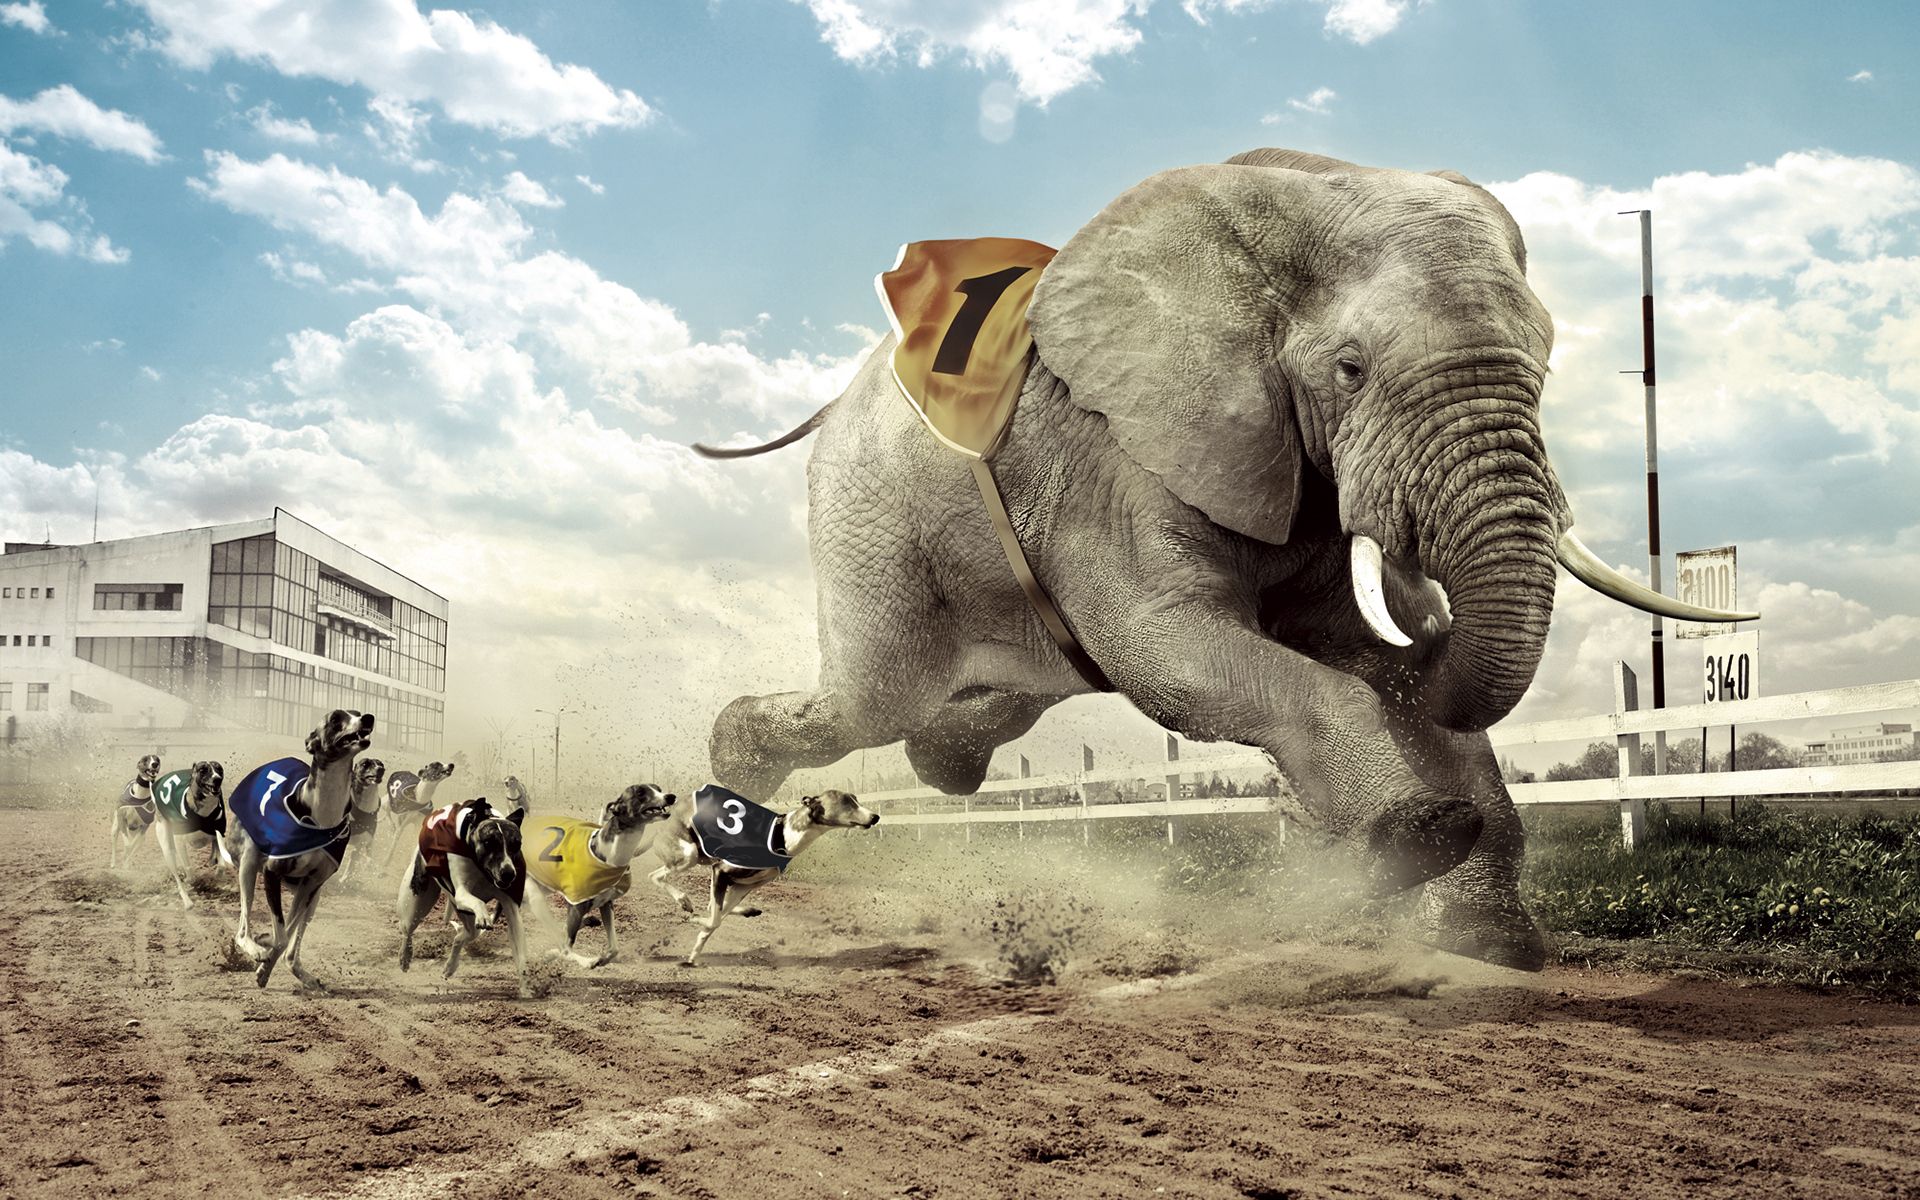 elephant, glass, animals, grass, sky, sand, building, lights, dog, lanterns, house, fence, fangs, cloud, track, heat, race, competition